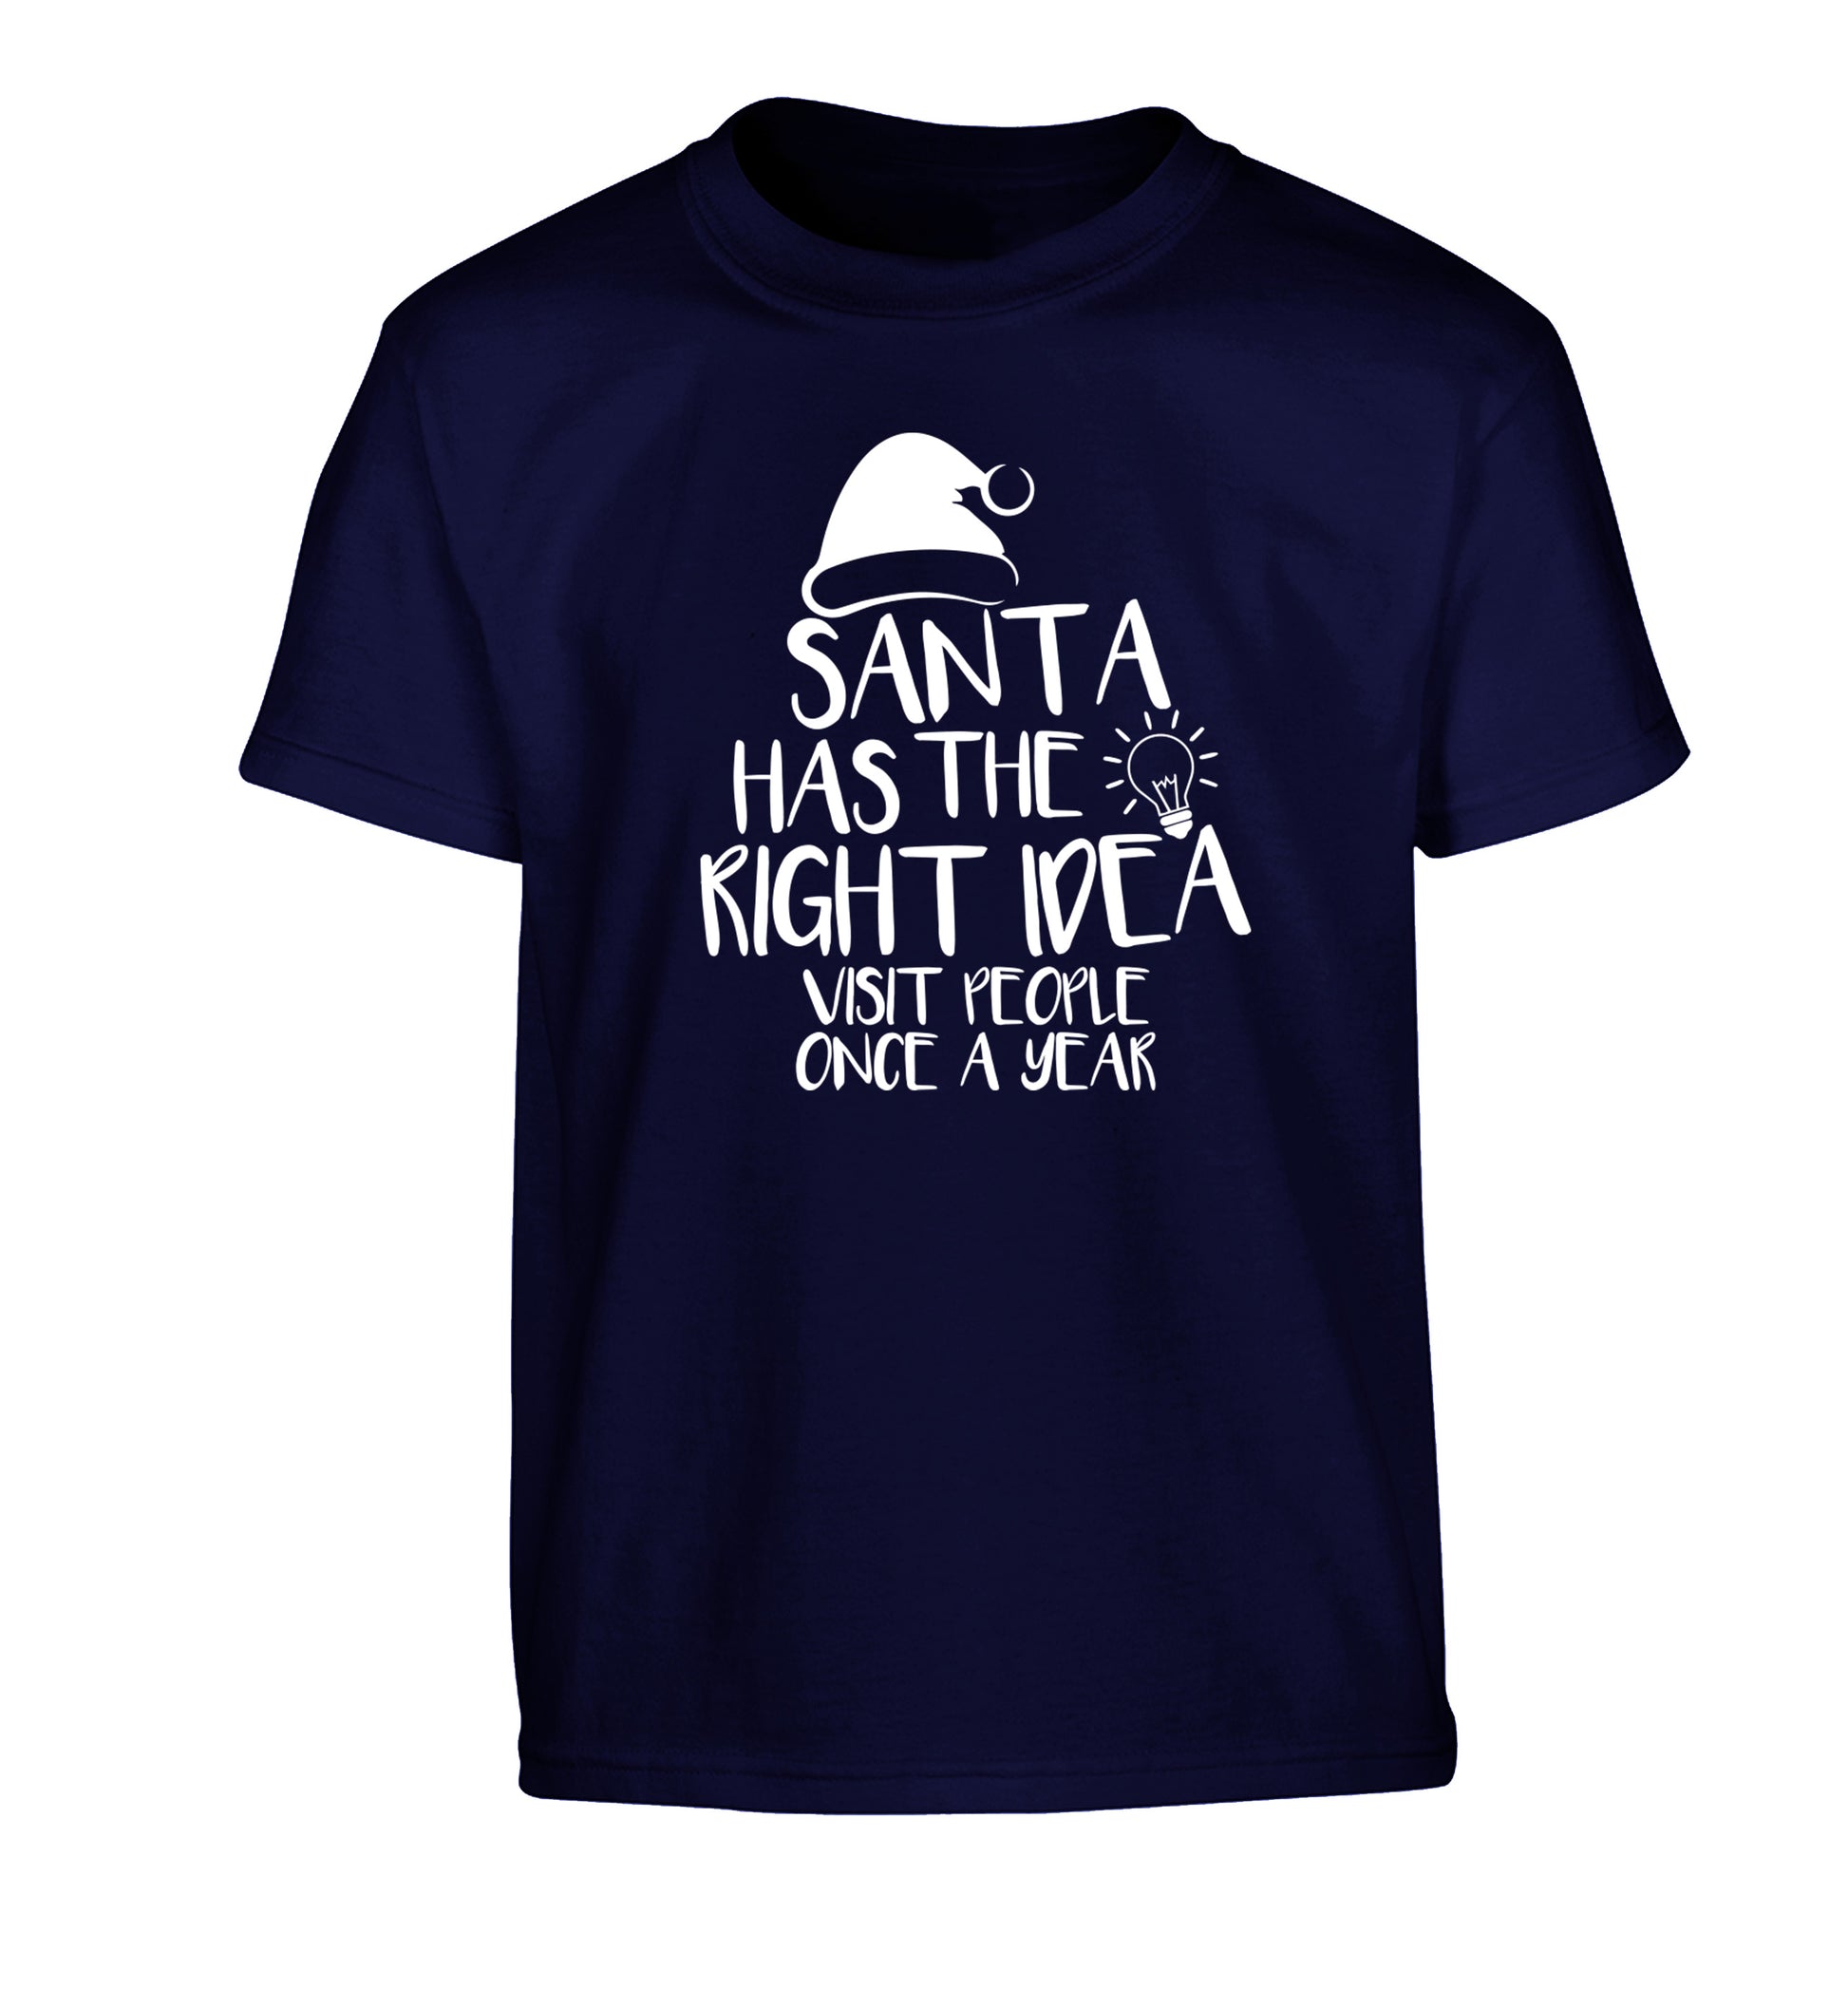 Santa has the right idea visit people once a year Children's navy Tshirt 12-14 Years